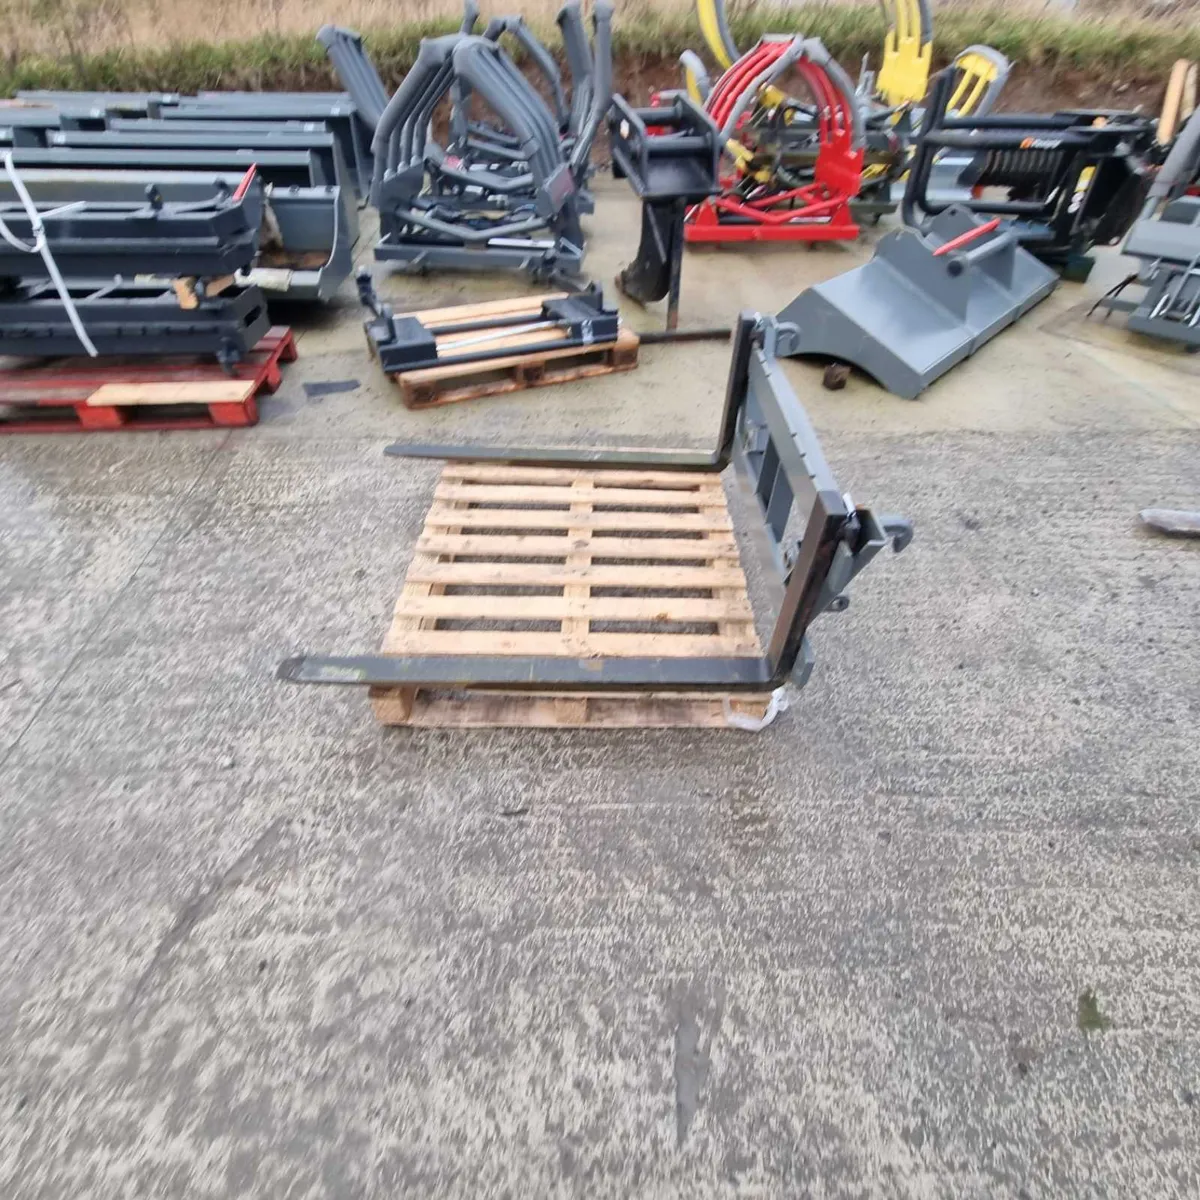 Pallet forks with Euro linkage SALE